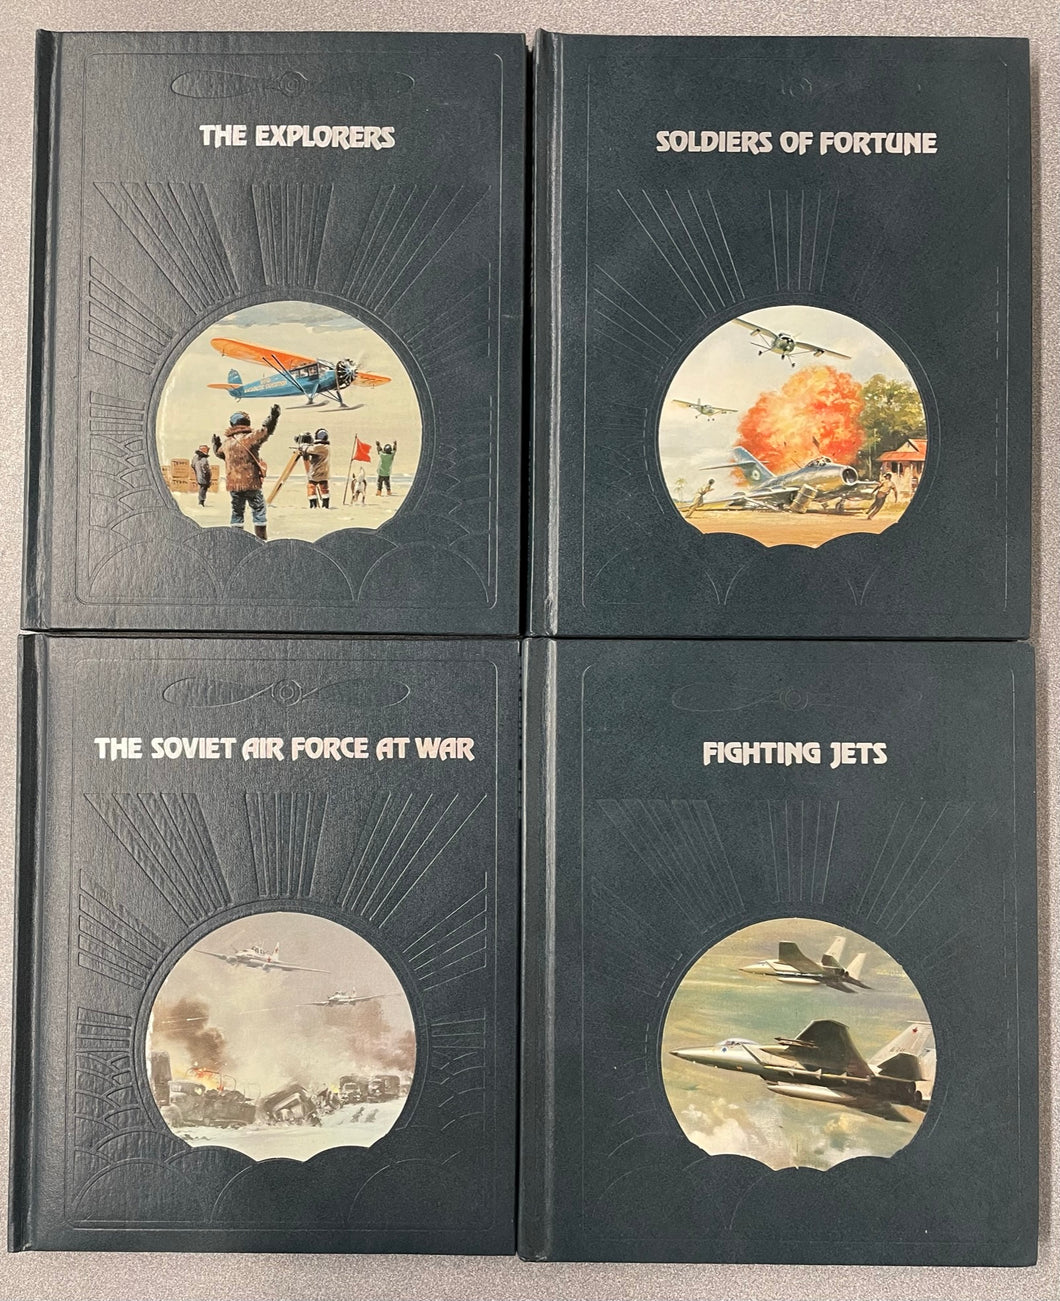 The Epic of Flight, 21 Volumes, Constable, George, ed., [1983] SS 7/23